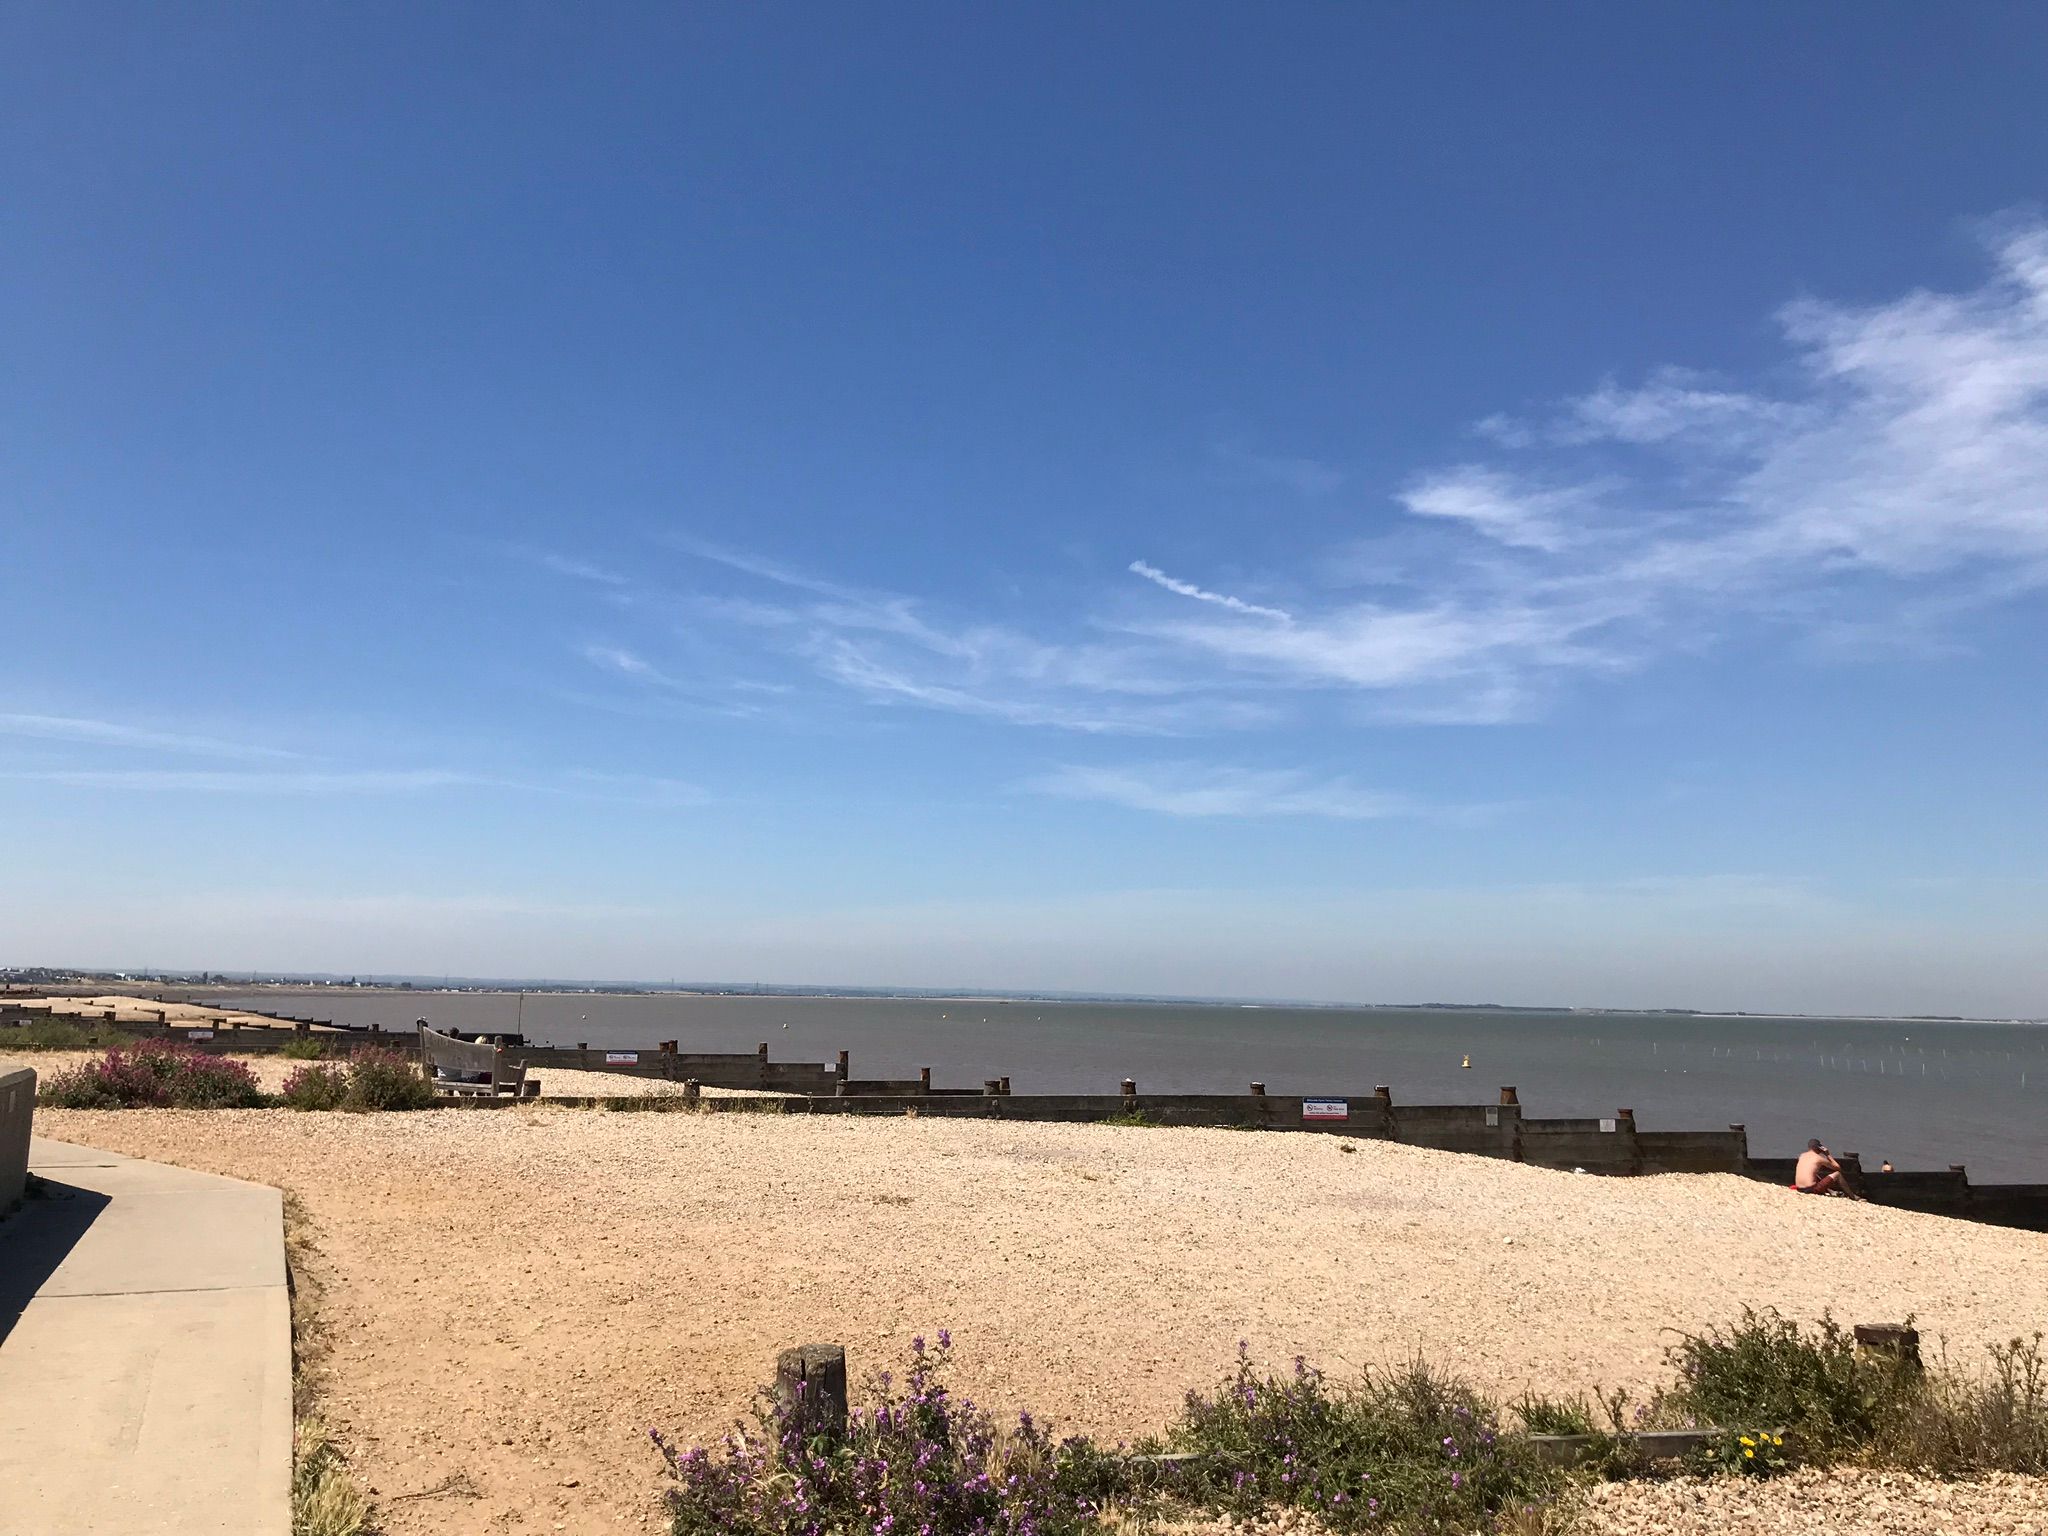 The beautiful shingle beach at whitstable and oyster beds in the distance